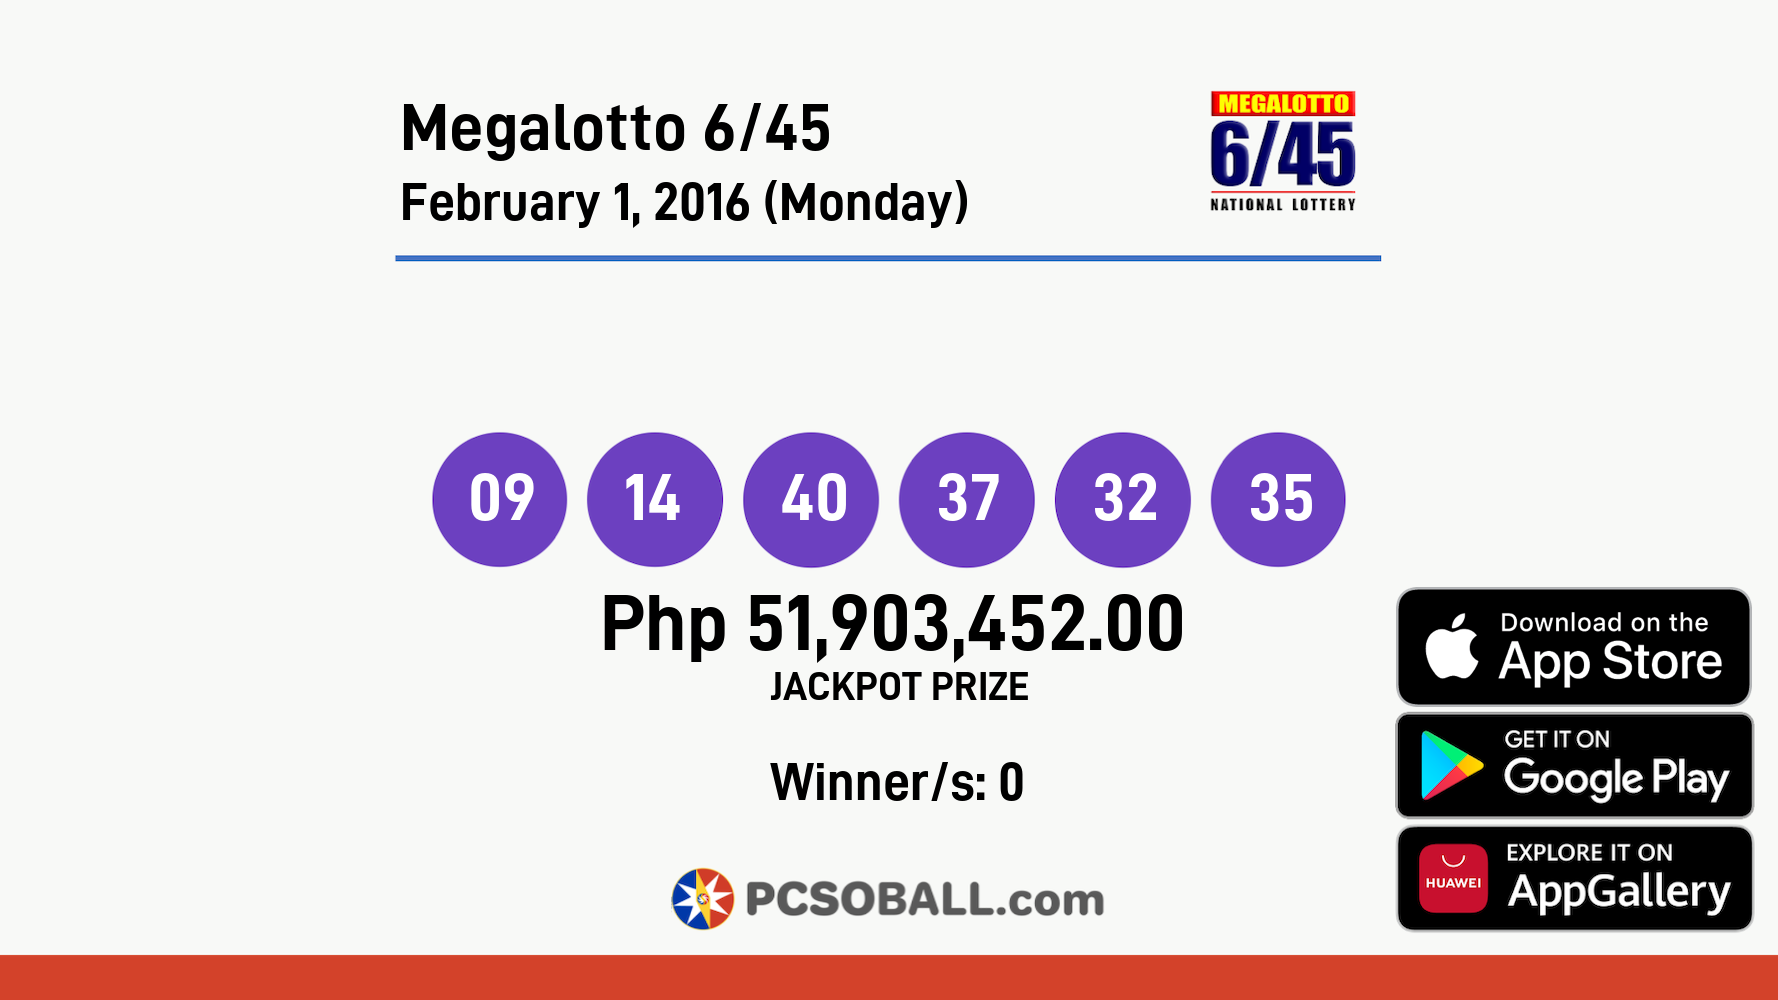 Megalotto 6/45 February 1, 2016 (Monday) Result